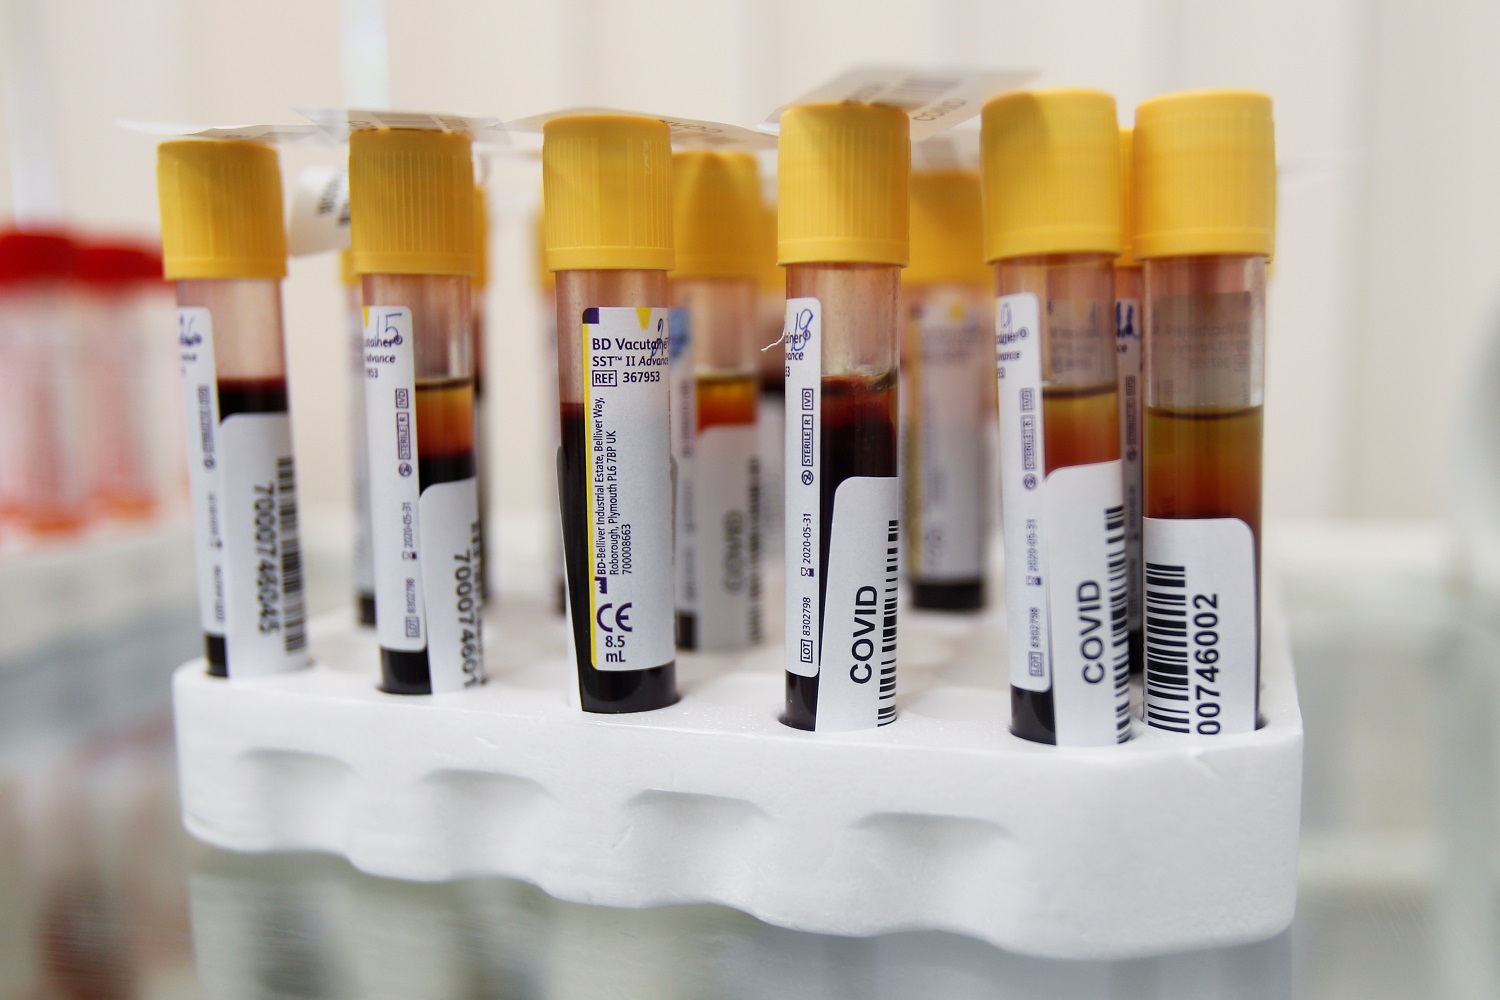 Vials with blood samples are pictured at a clinic providing testing for the coronavirus disease (COVID-19) and antibodies in Moscow